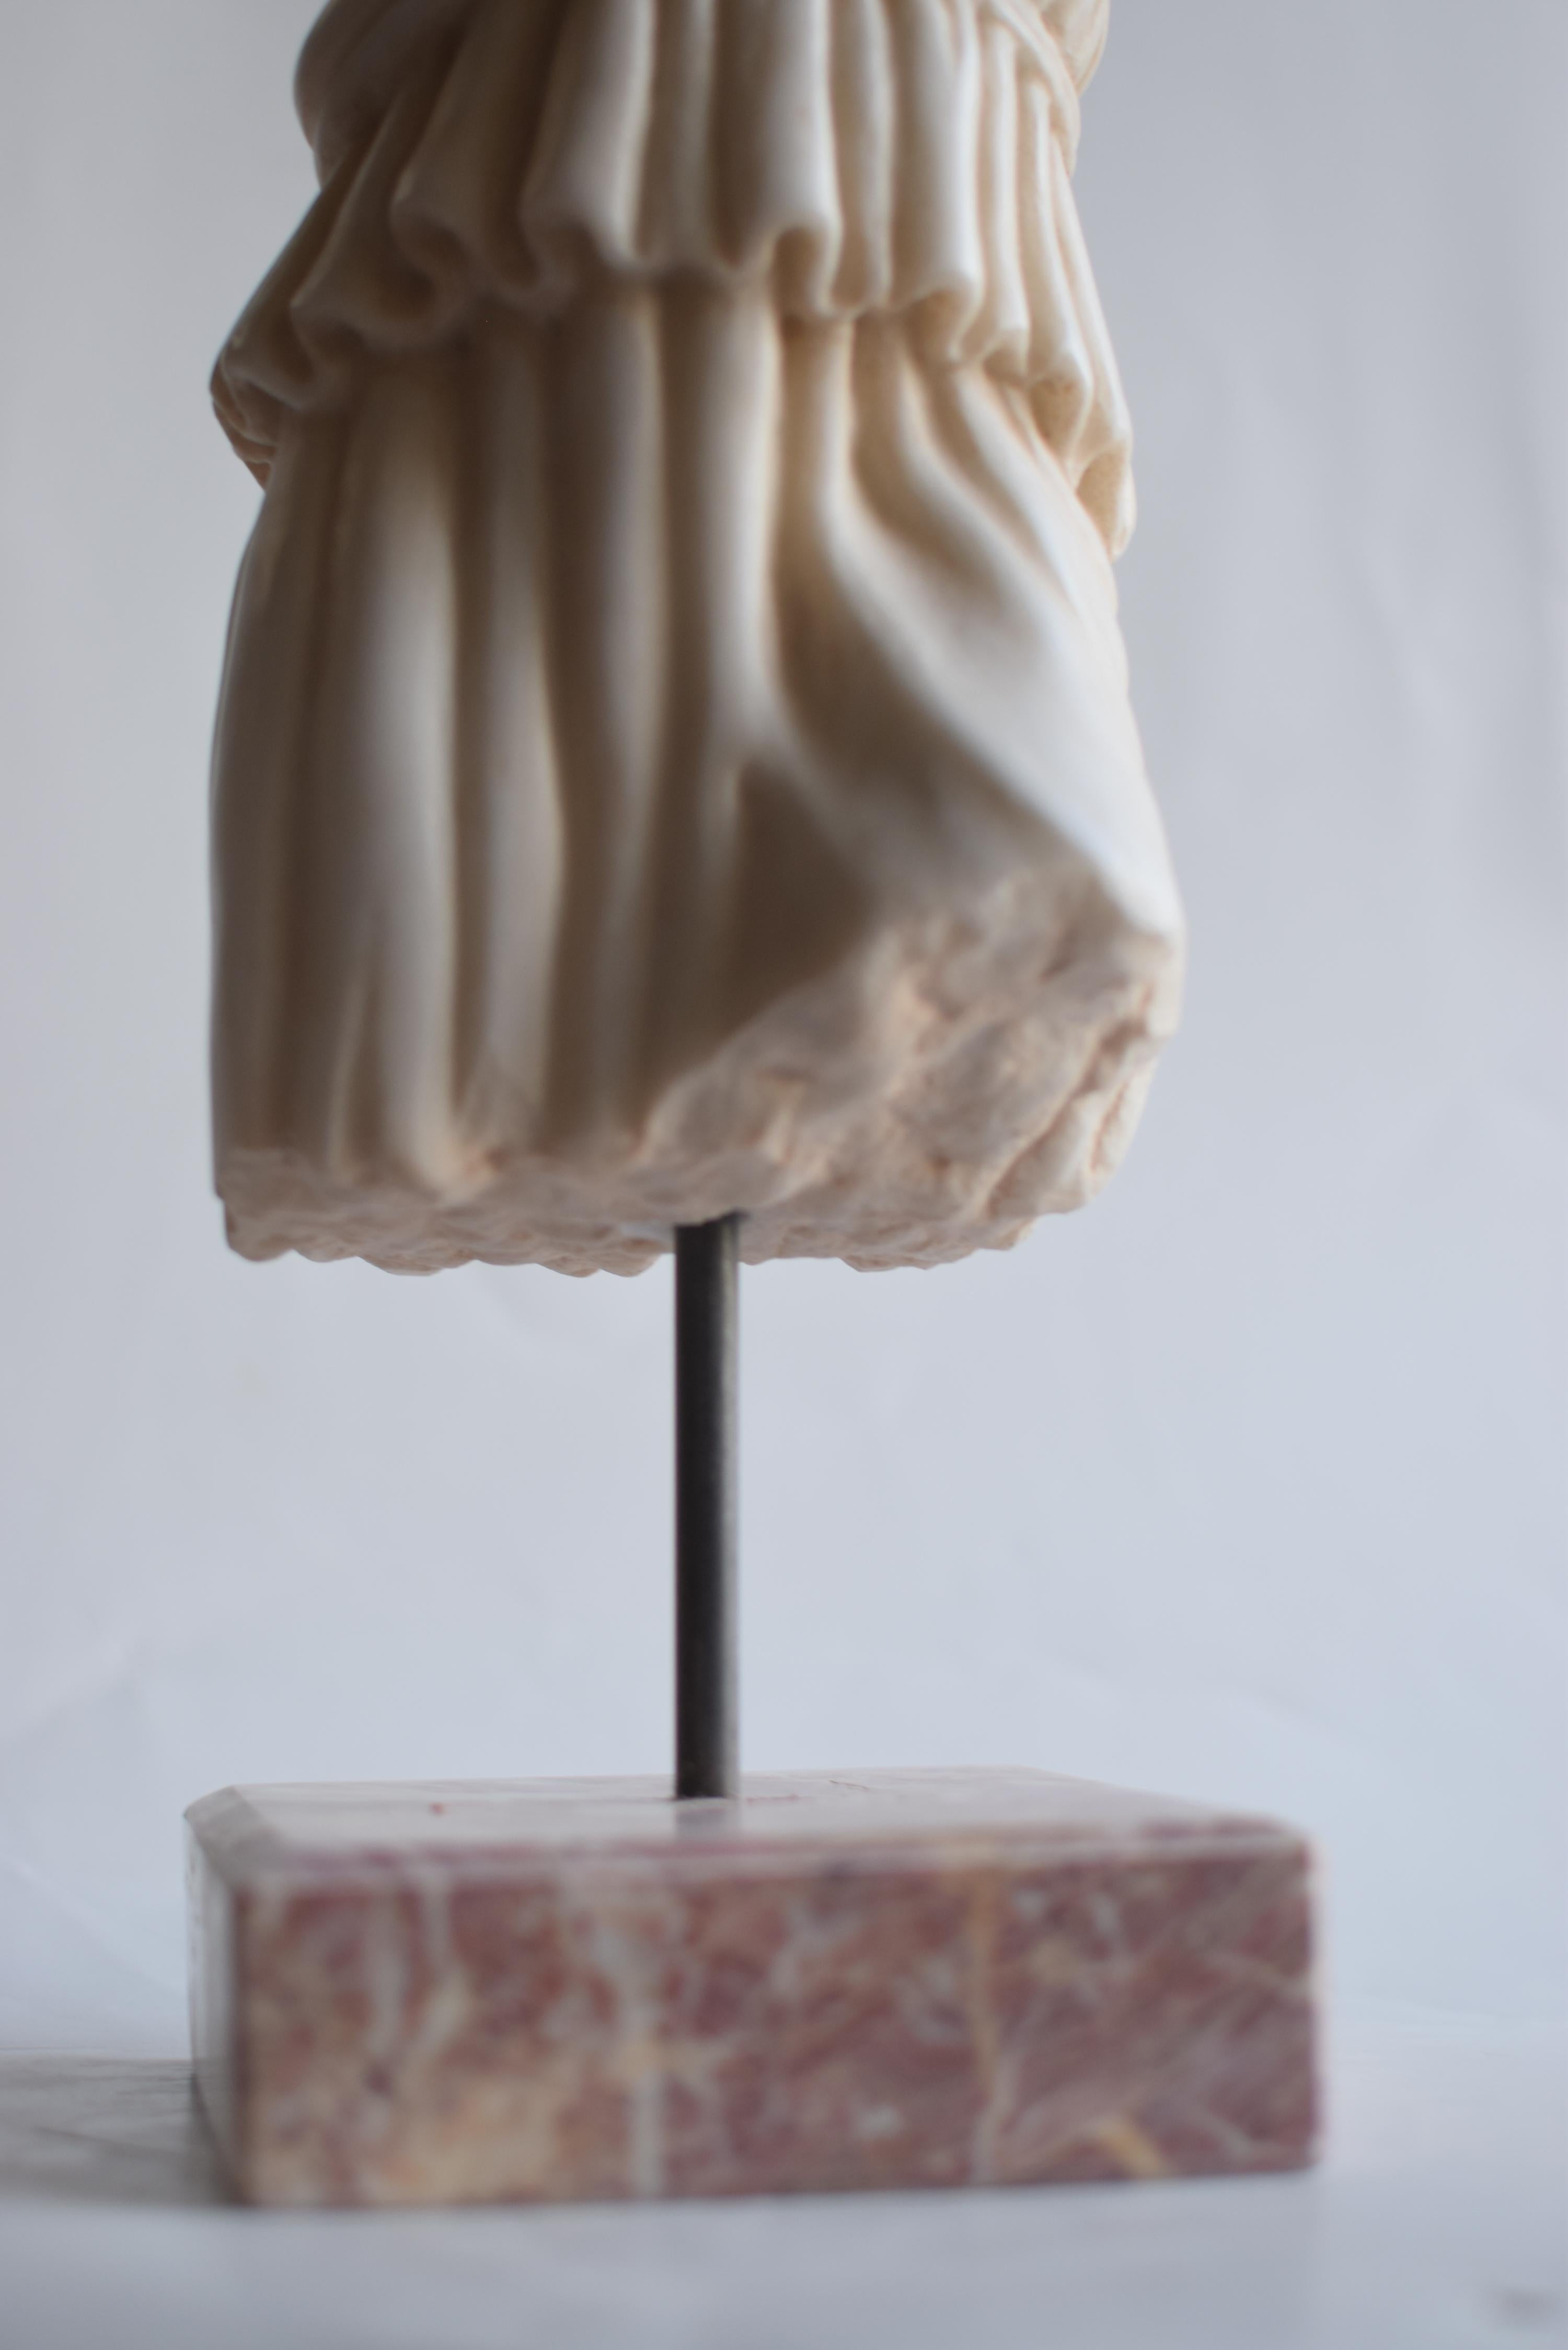 Hand-Crafted Female toga torso carved from white Carrara marble For Sale